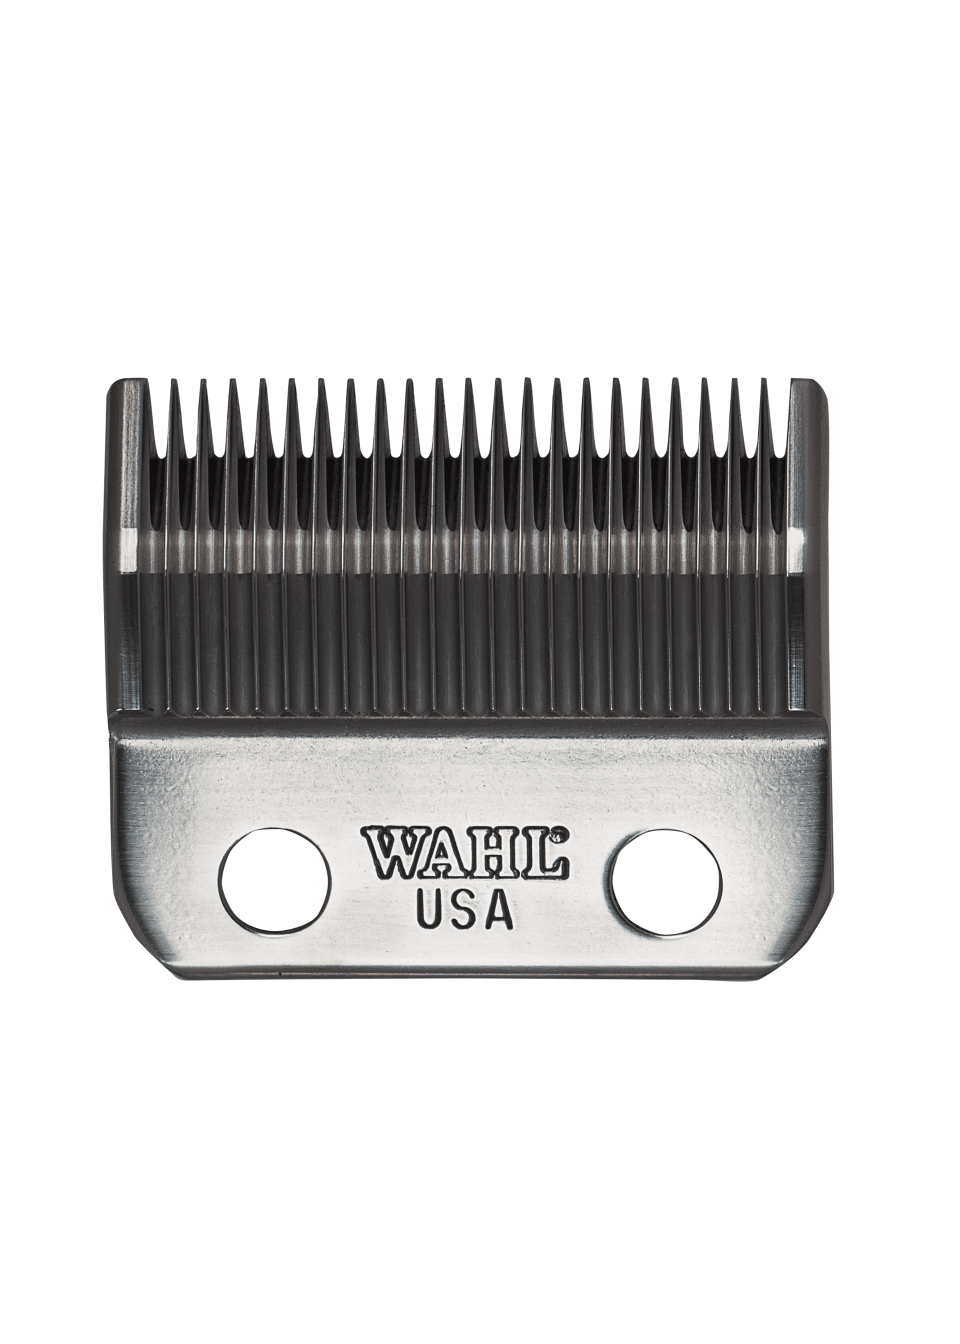 wahl 7061l replacement blades